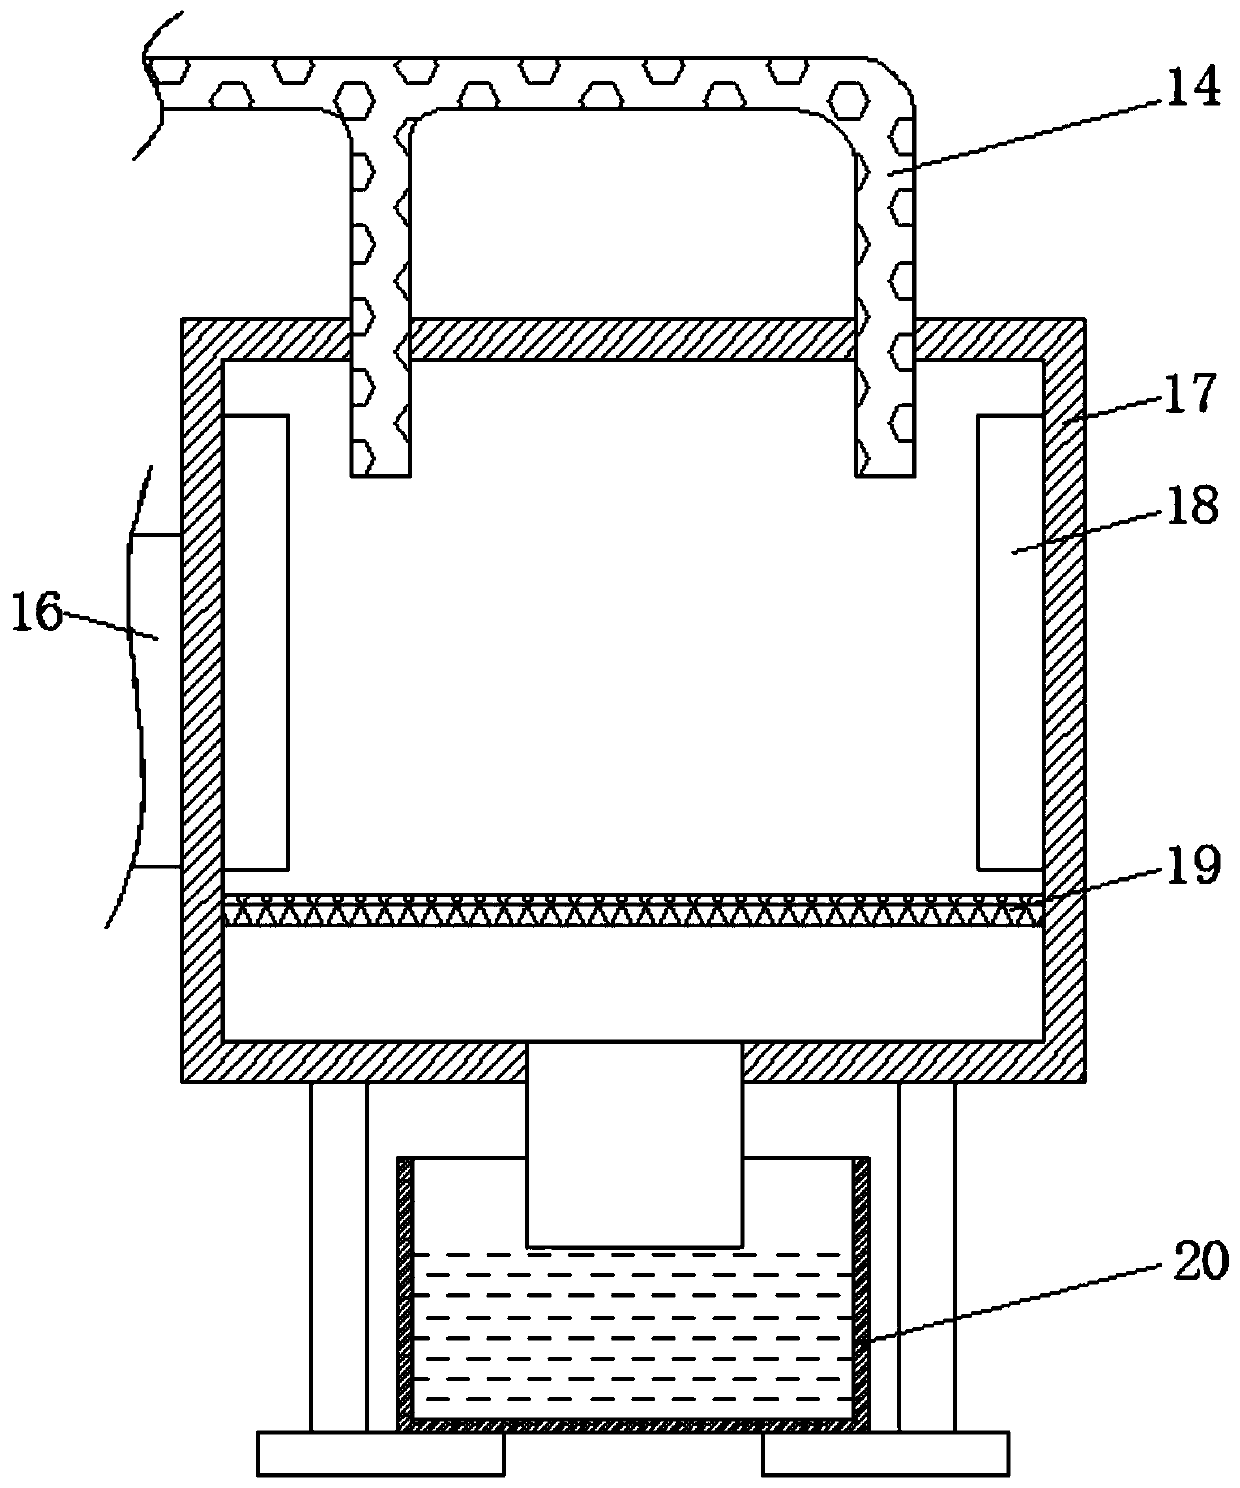 Instrument surface dust removal device based on centrifugal separation principle